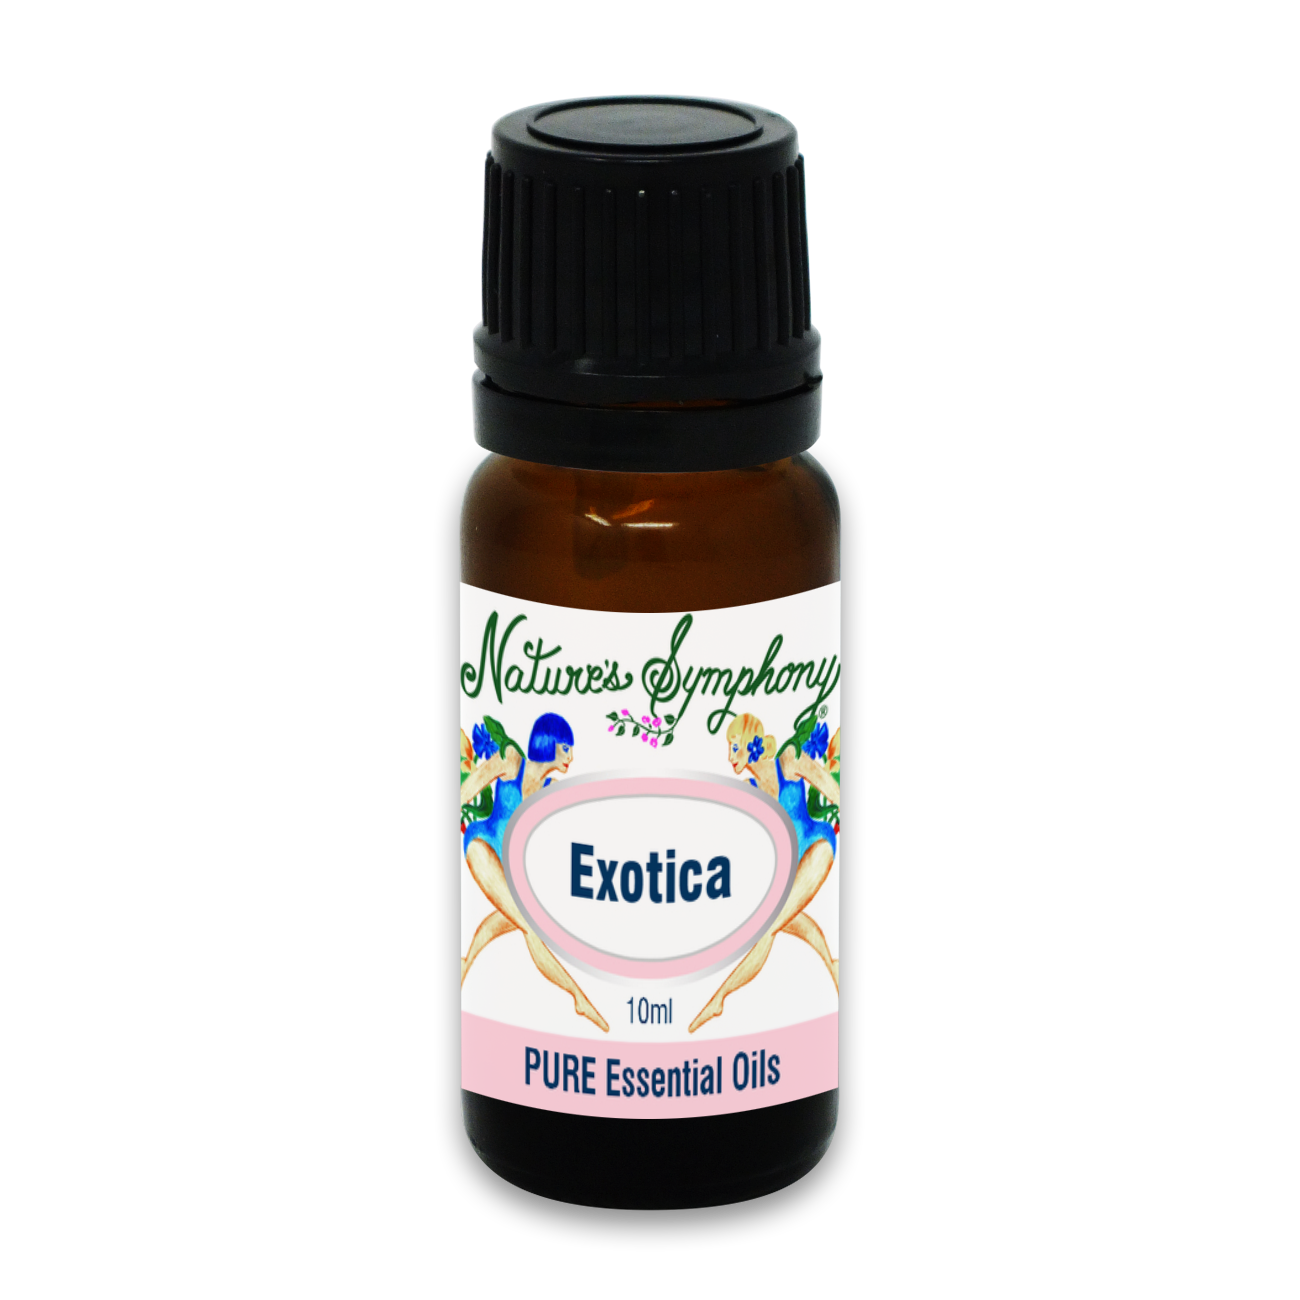 Exotica, Ambiance Diffusion blend - 10ml